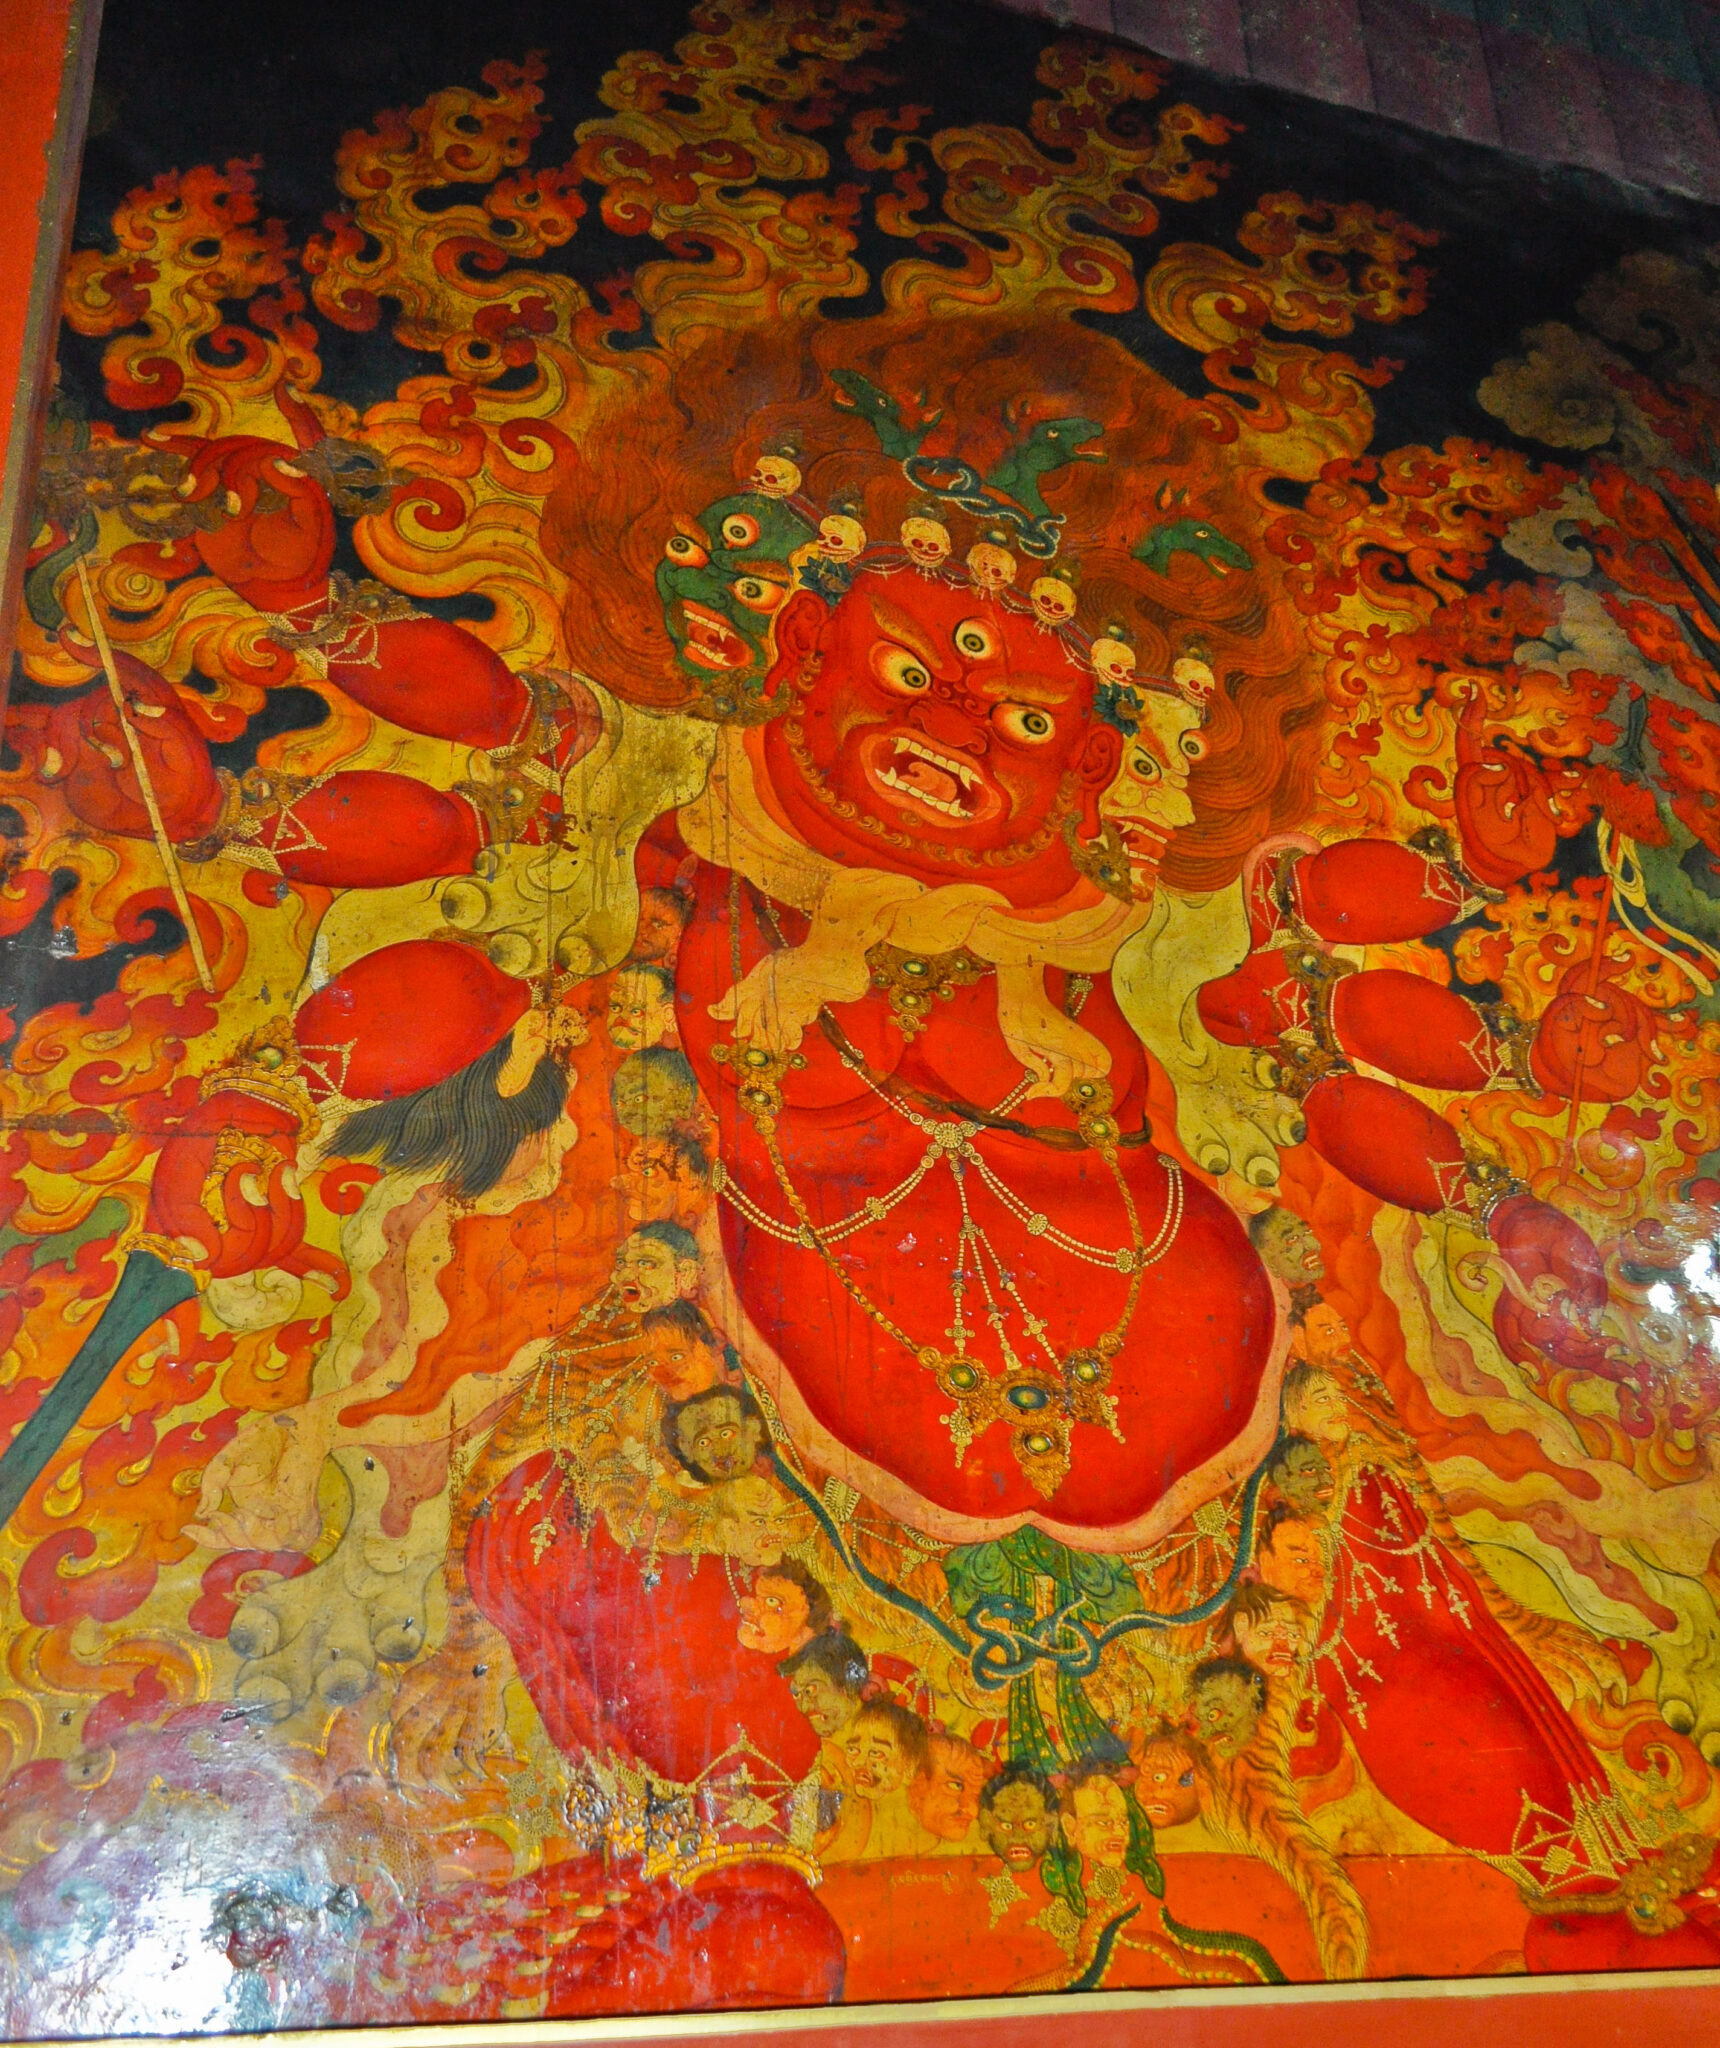 Mural depicting wrathful deity with red skin wearing animal and human pelts, standing before flames